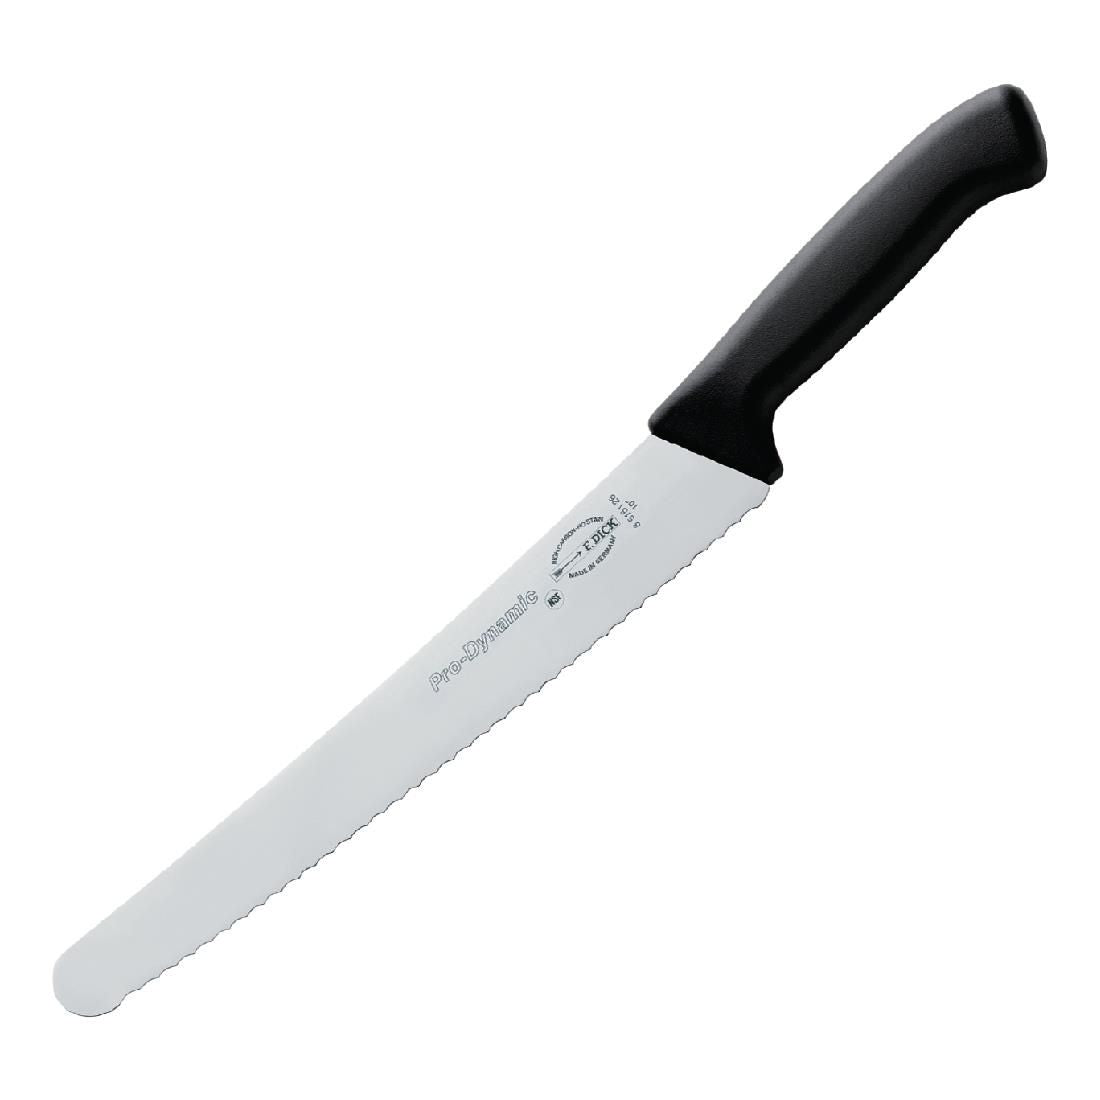 DL377 Dick Pro Dynamic HACCP Serrated Pastry Knife Black 25.5cm JD Catering Equipment Solutions Ltd